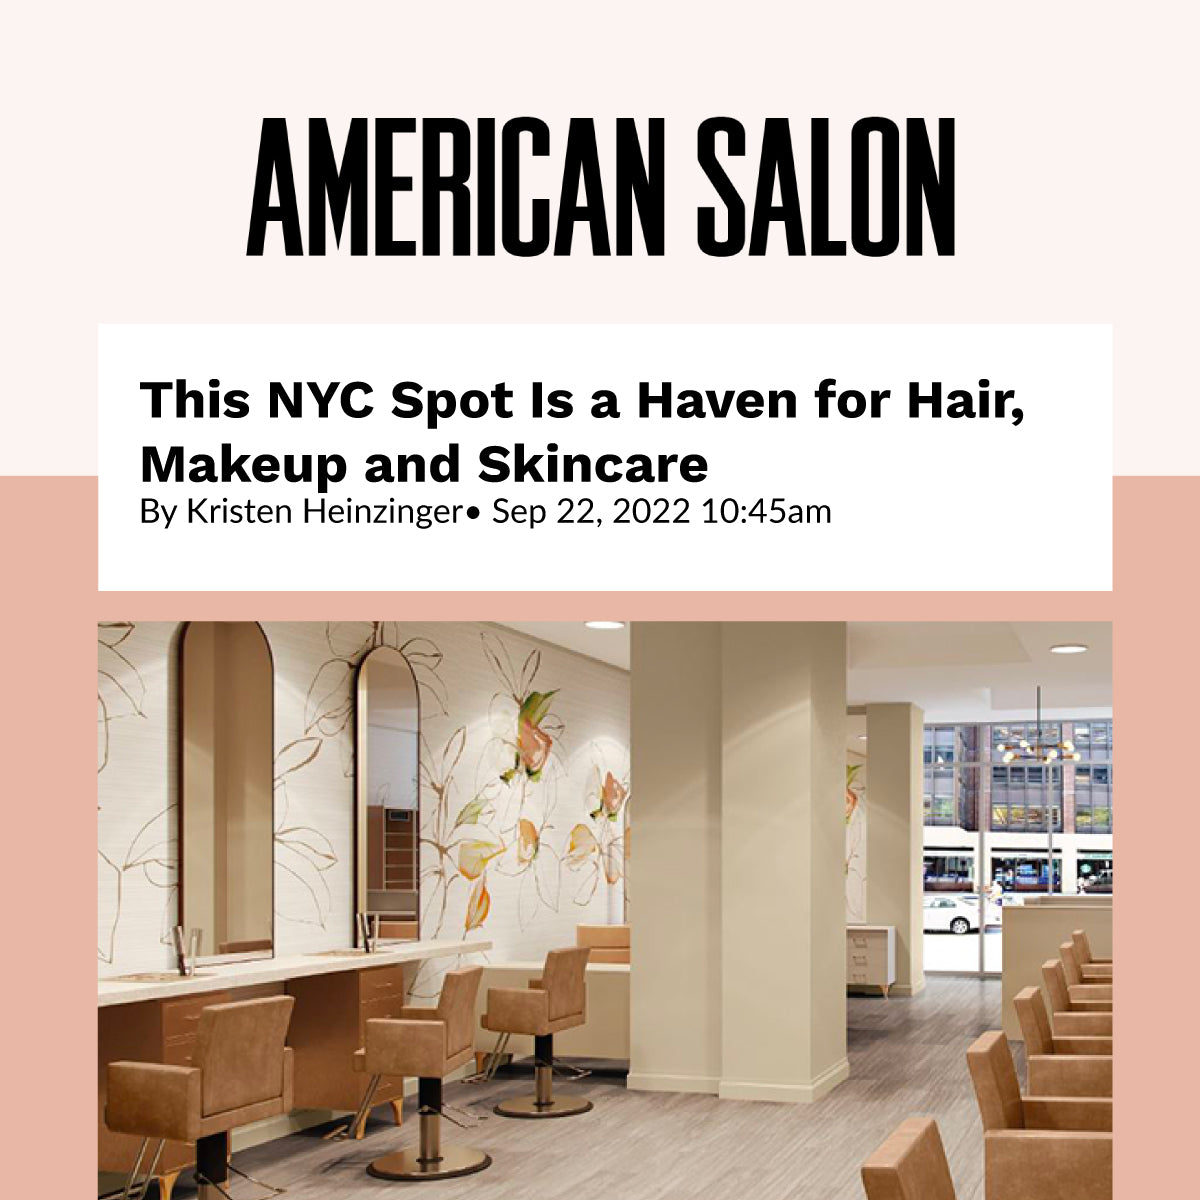 American Salon - Blowouts, Makeup, Skincare Under one roof